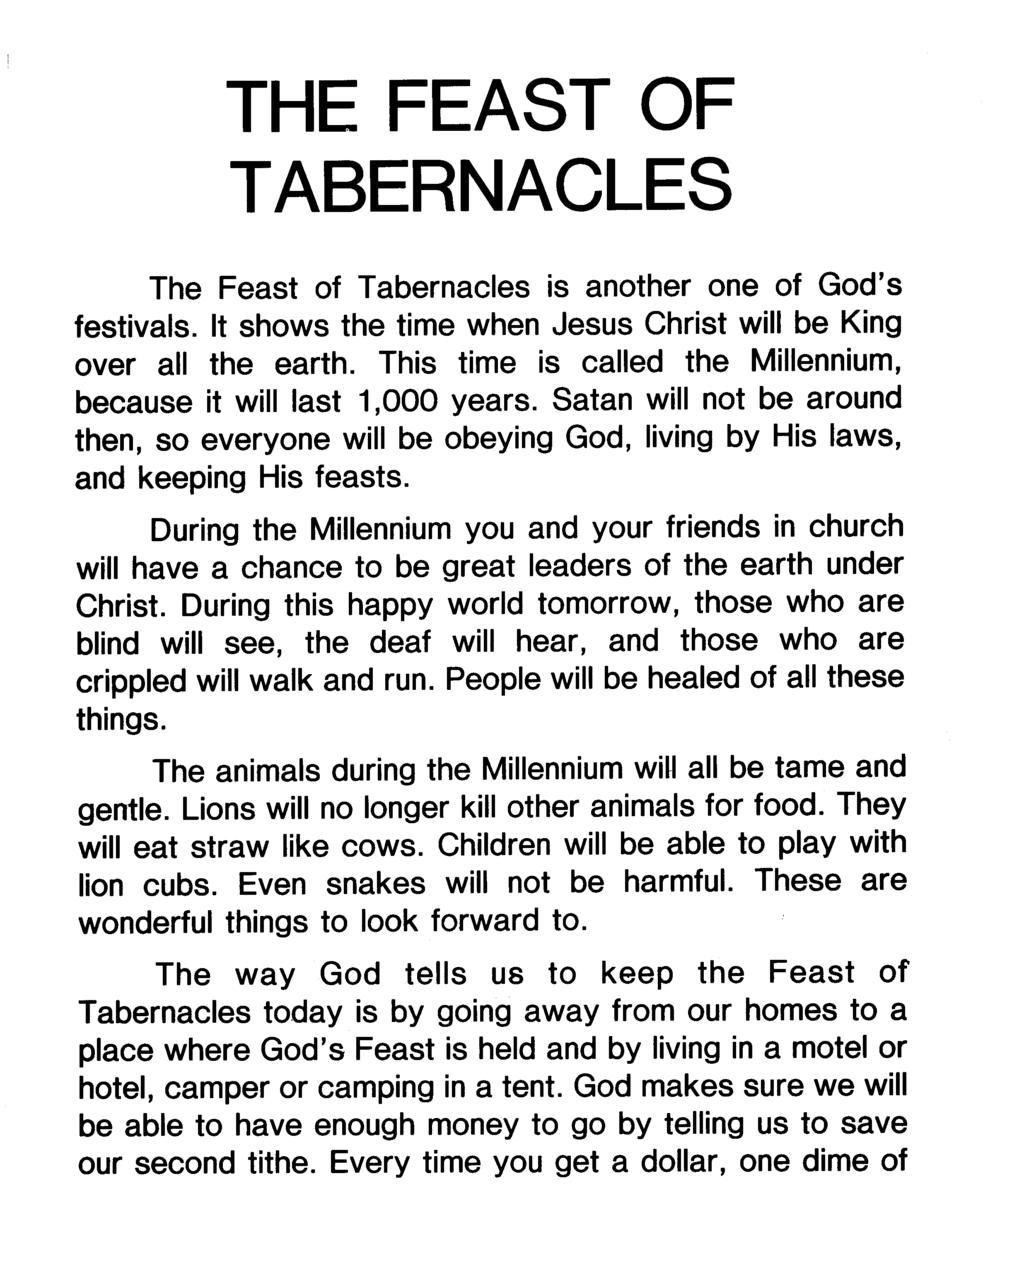 THE FEAST OF TABERNACLES The Feast of Tabernacles is another one of God's festivals. It shows the time when Jesus Christ will be King over all the earth.